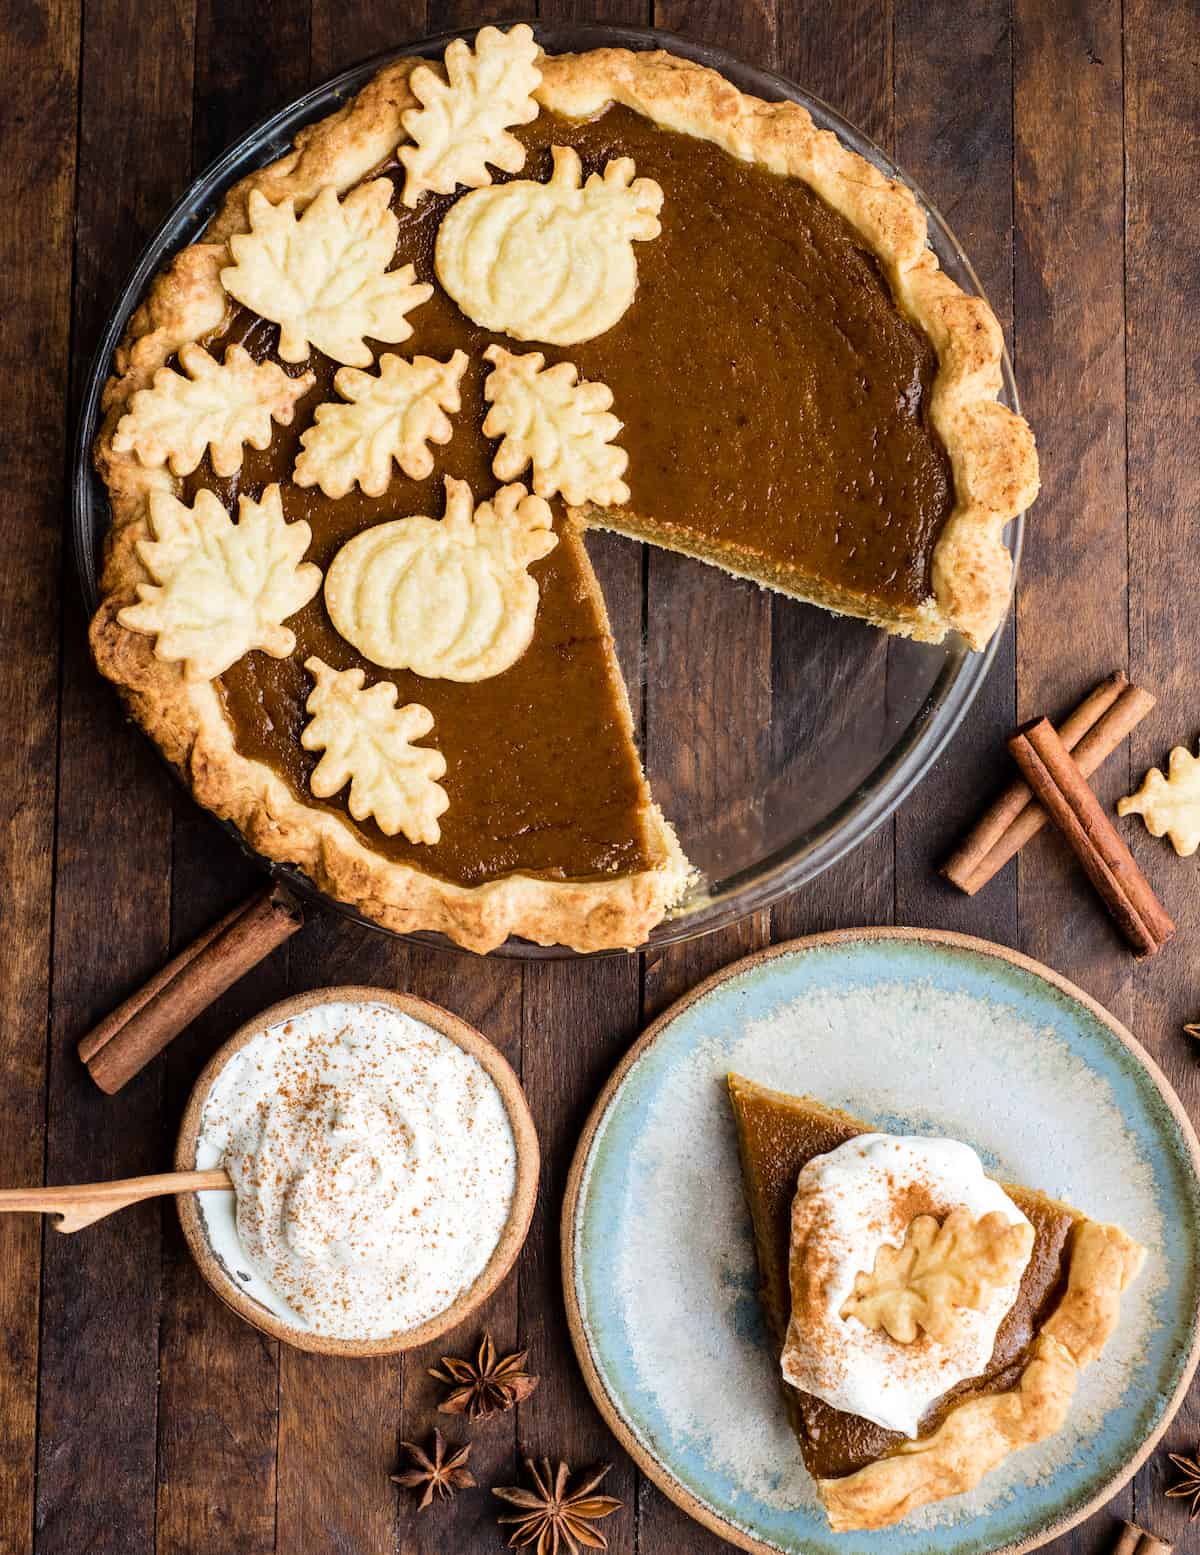 overhead view of dairy-free pumpkin pie in a glass pie dish with one piece cut out and on a plate next to the pie dish